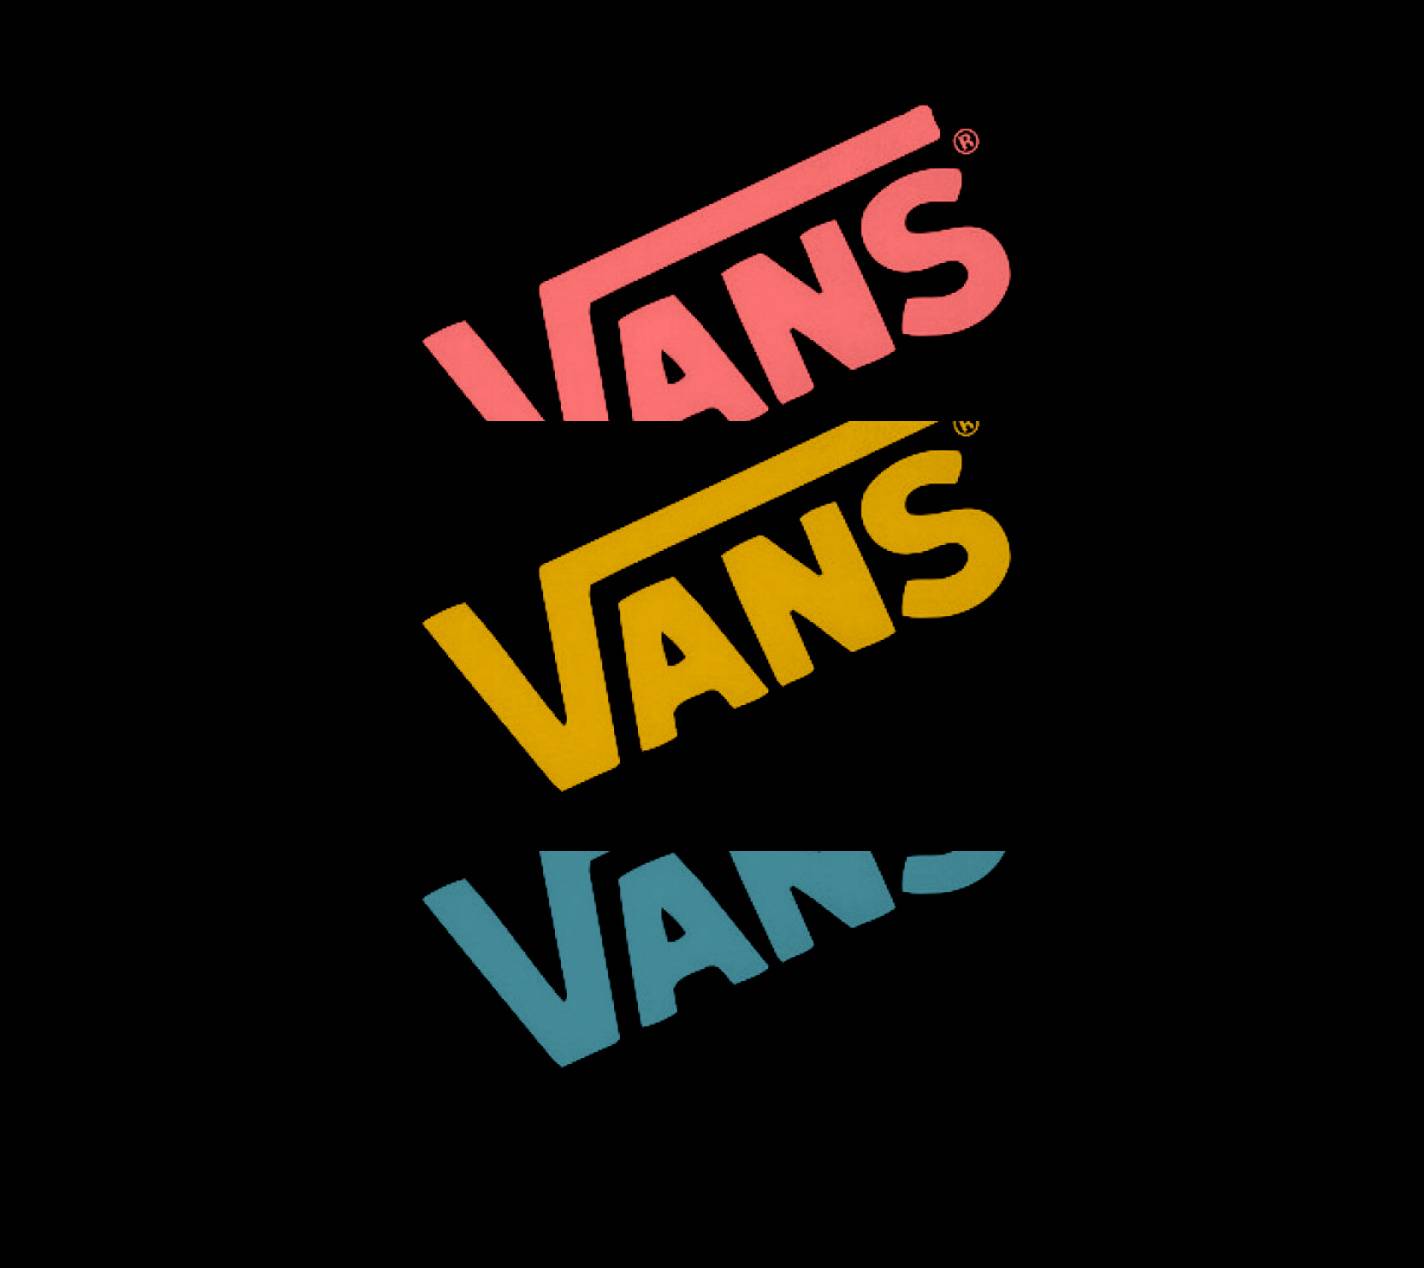 Download free vans off the wall wallpaper for your mobile phone